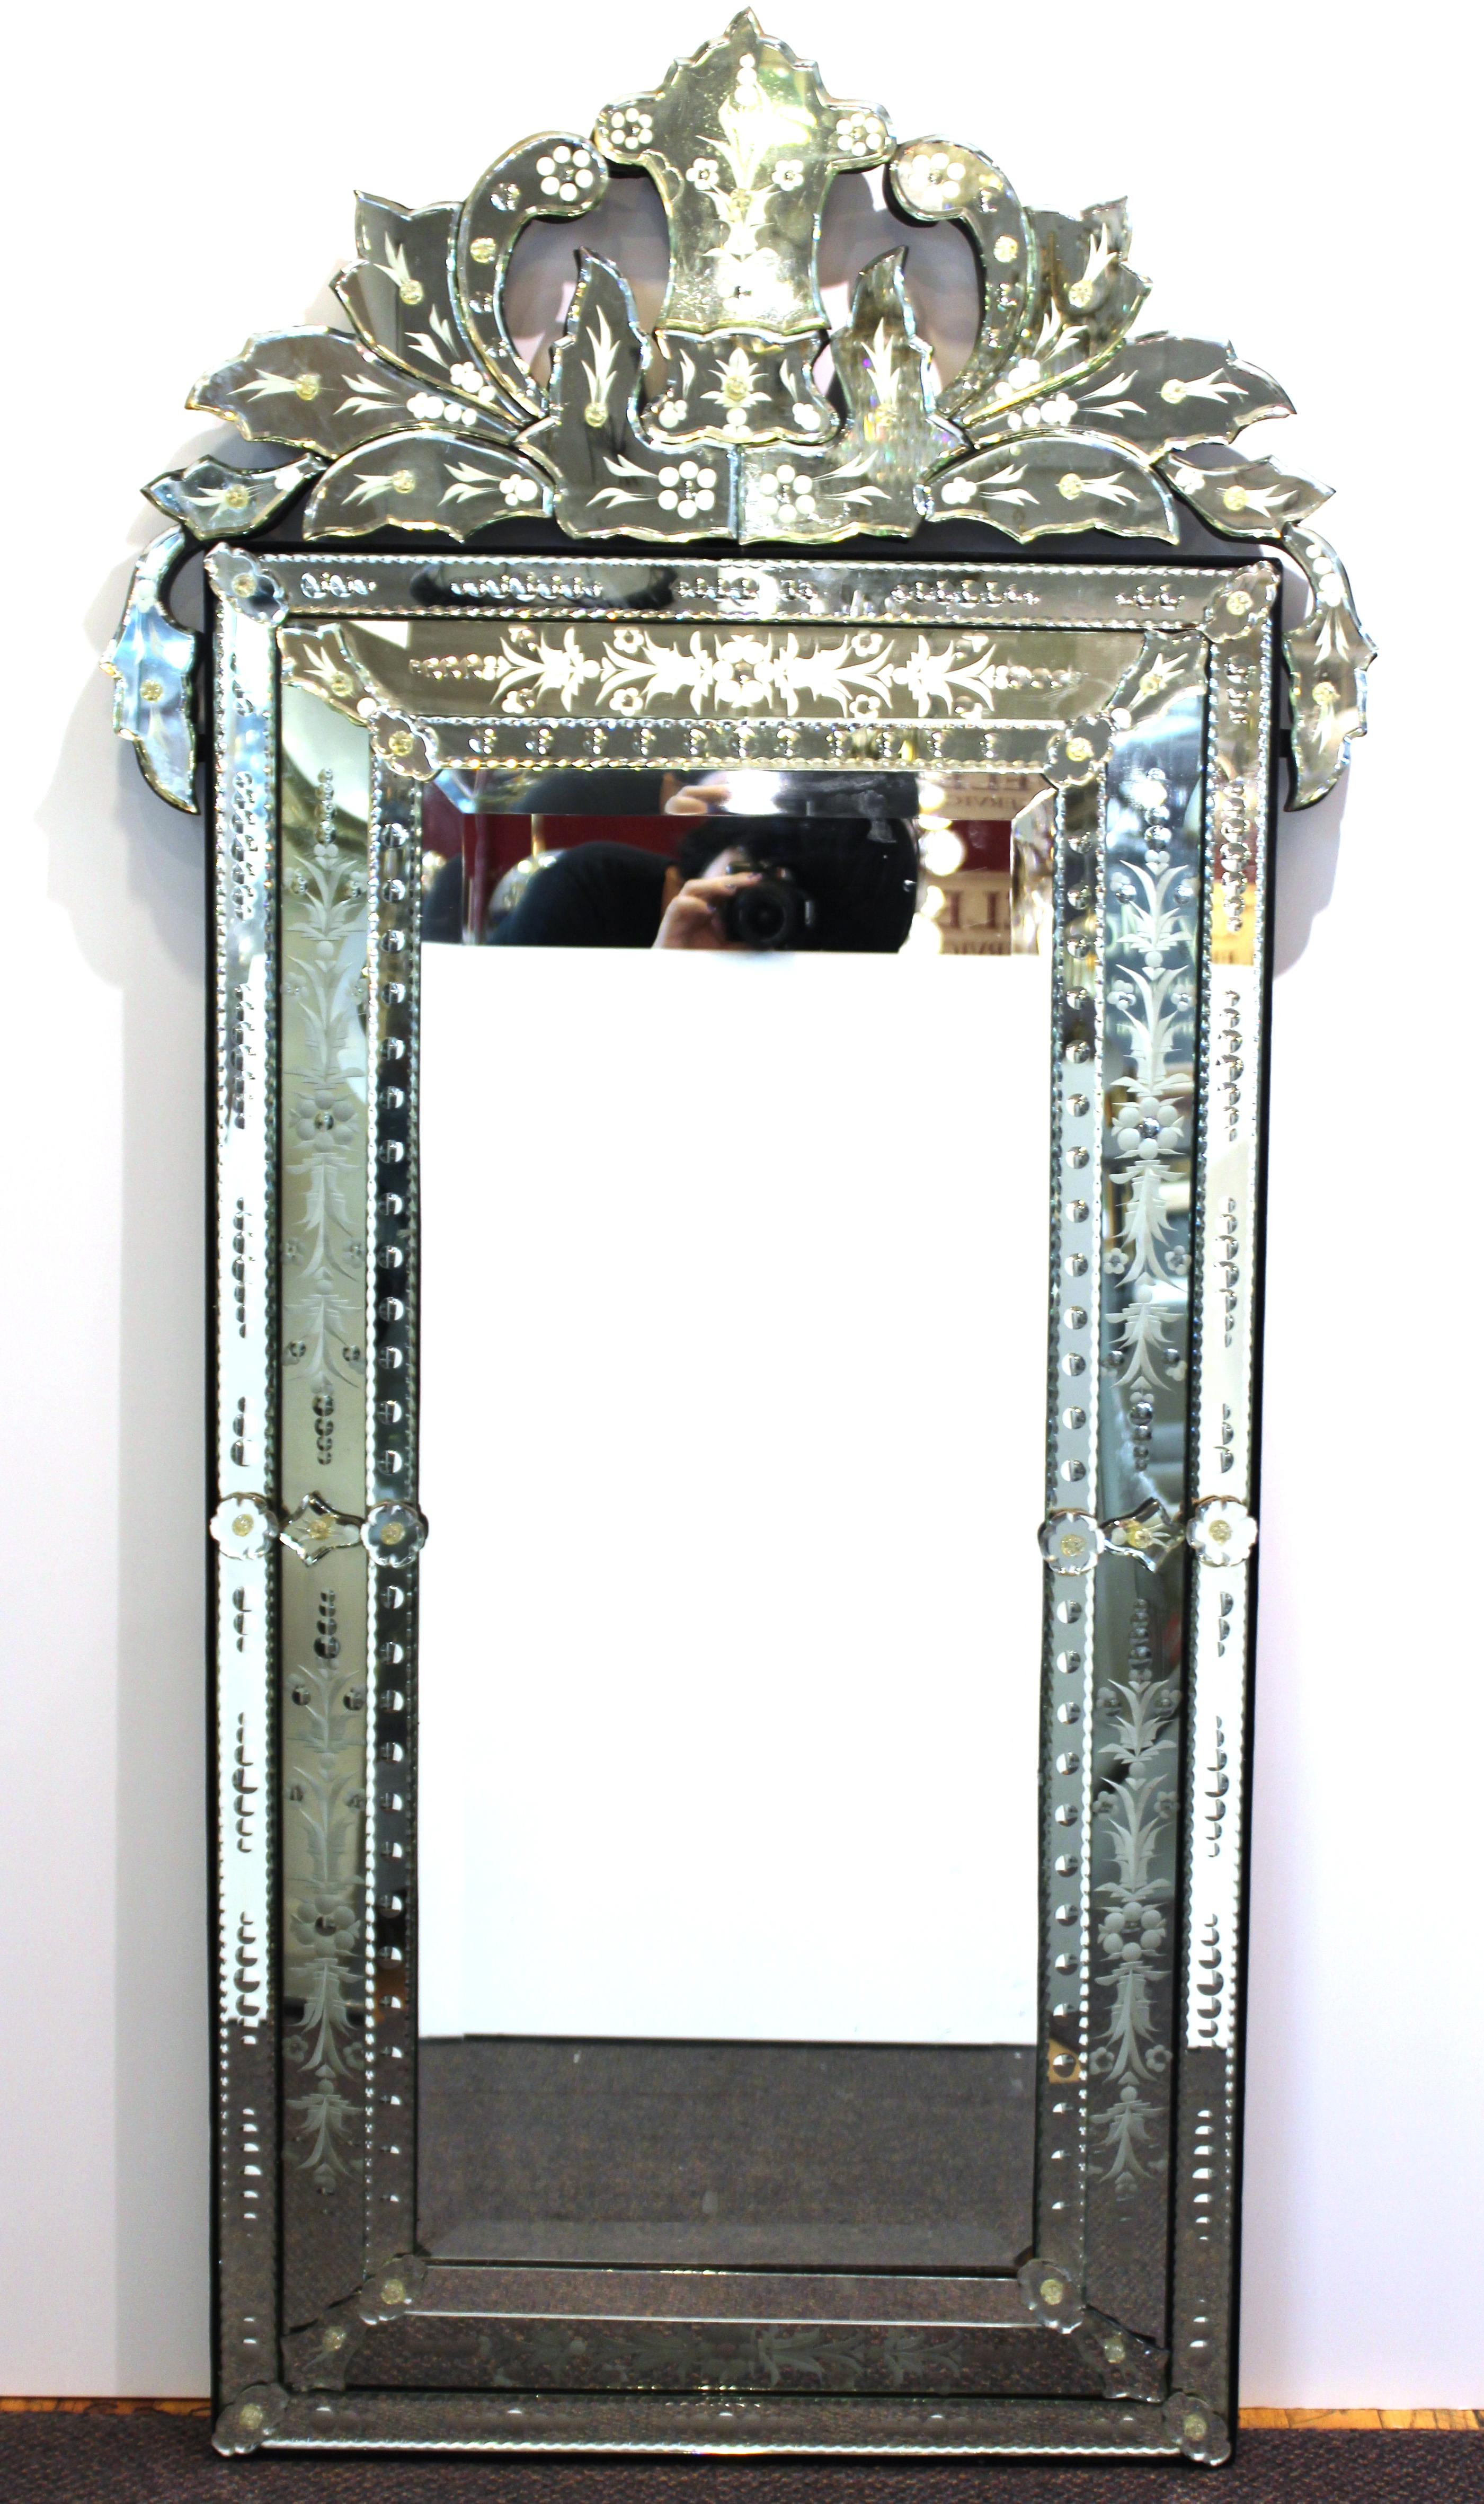 Hollywood Regency Venetian wall mirror, produced in Italy, circa 1940s, the crowned frame decorated with floral etching and scrolling glass panels. The mirror remains in great vintage condition, consistent with age and use.